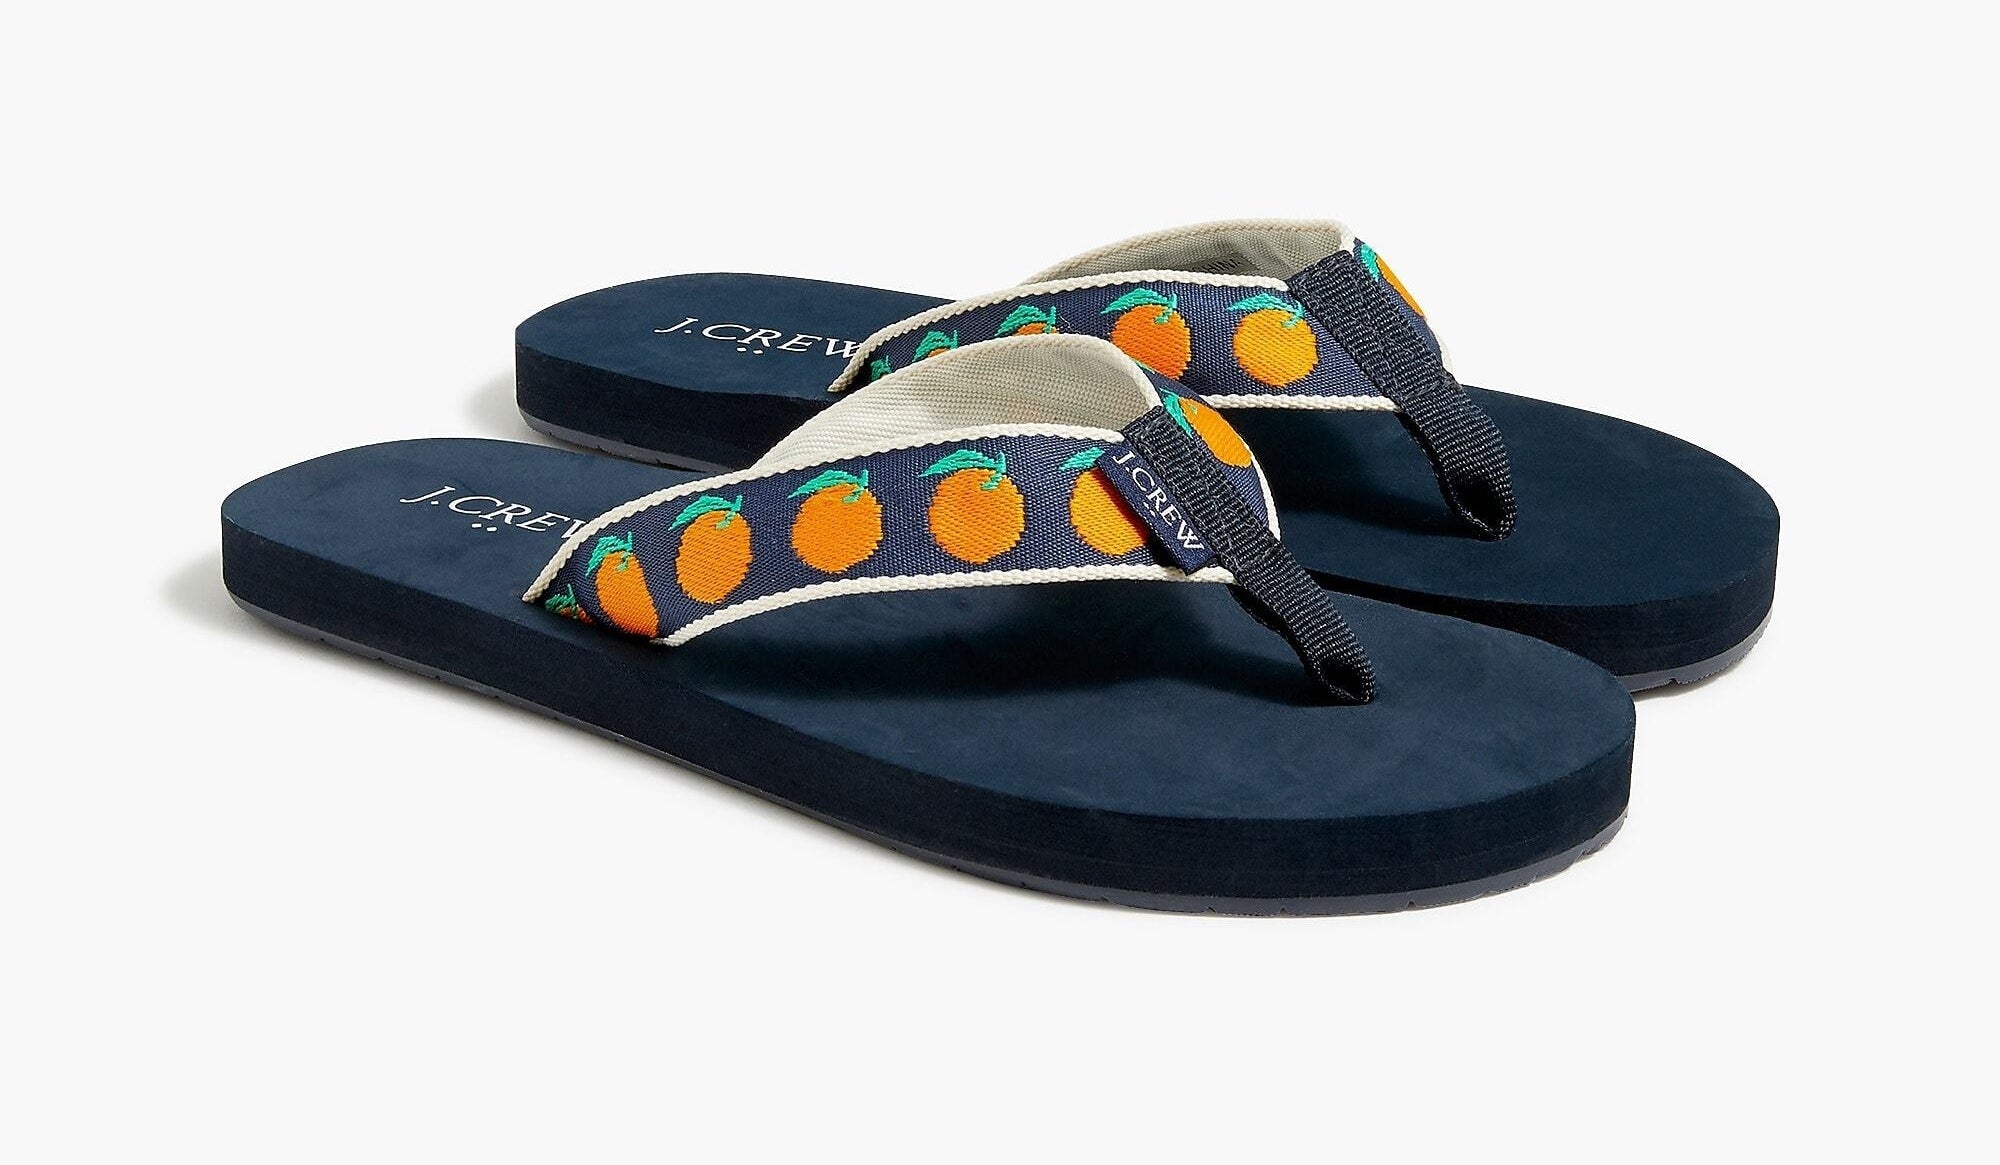 The pair of navy embroidered orange flip-flops